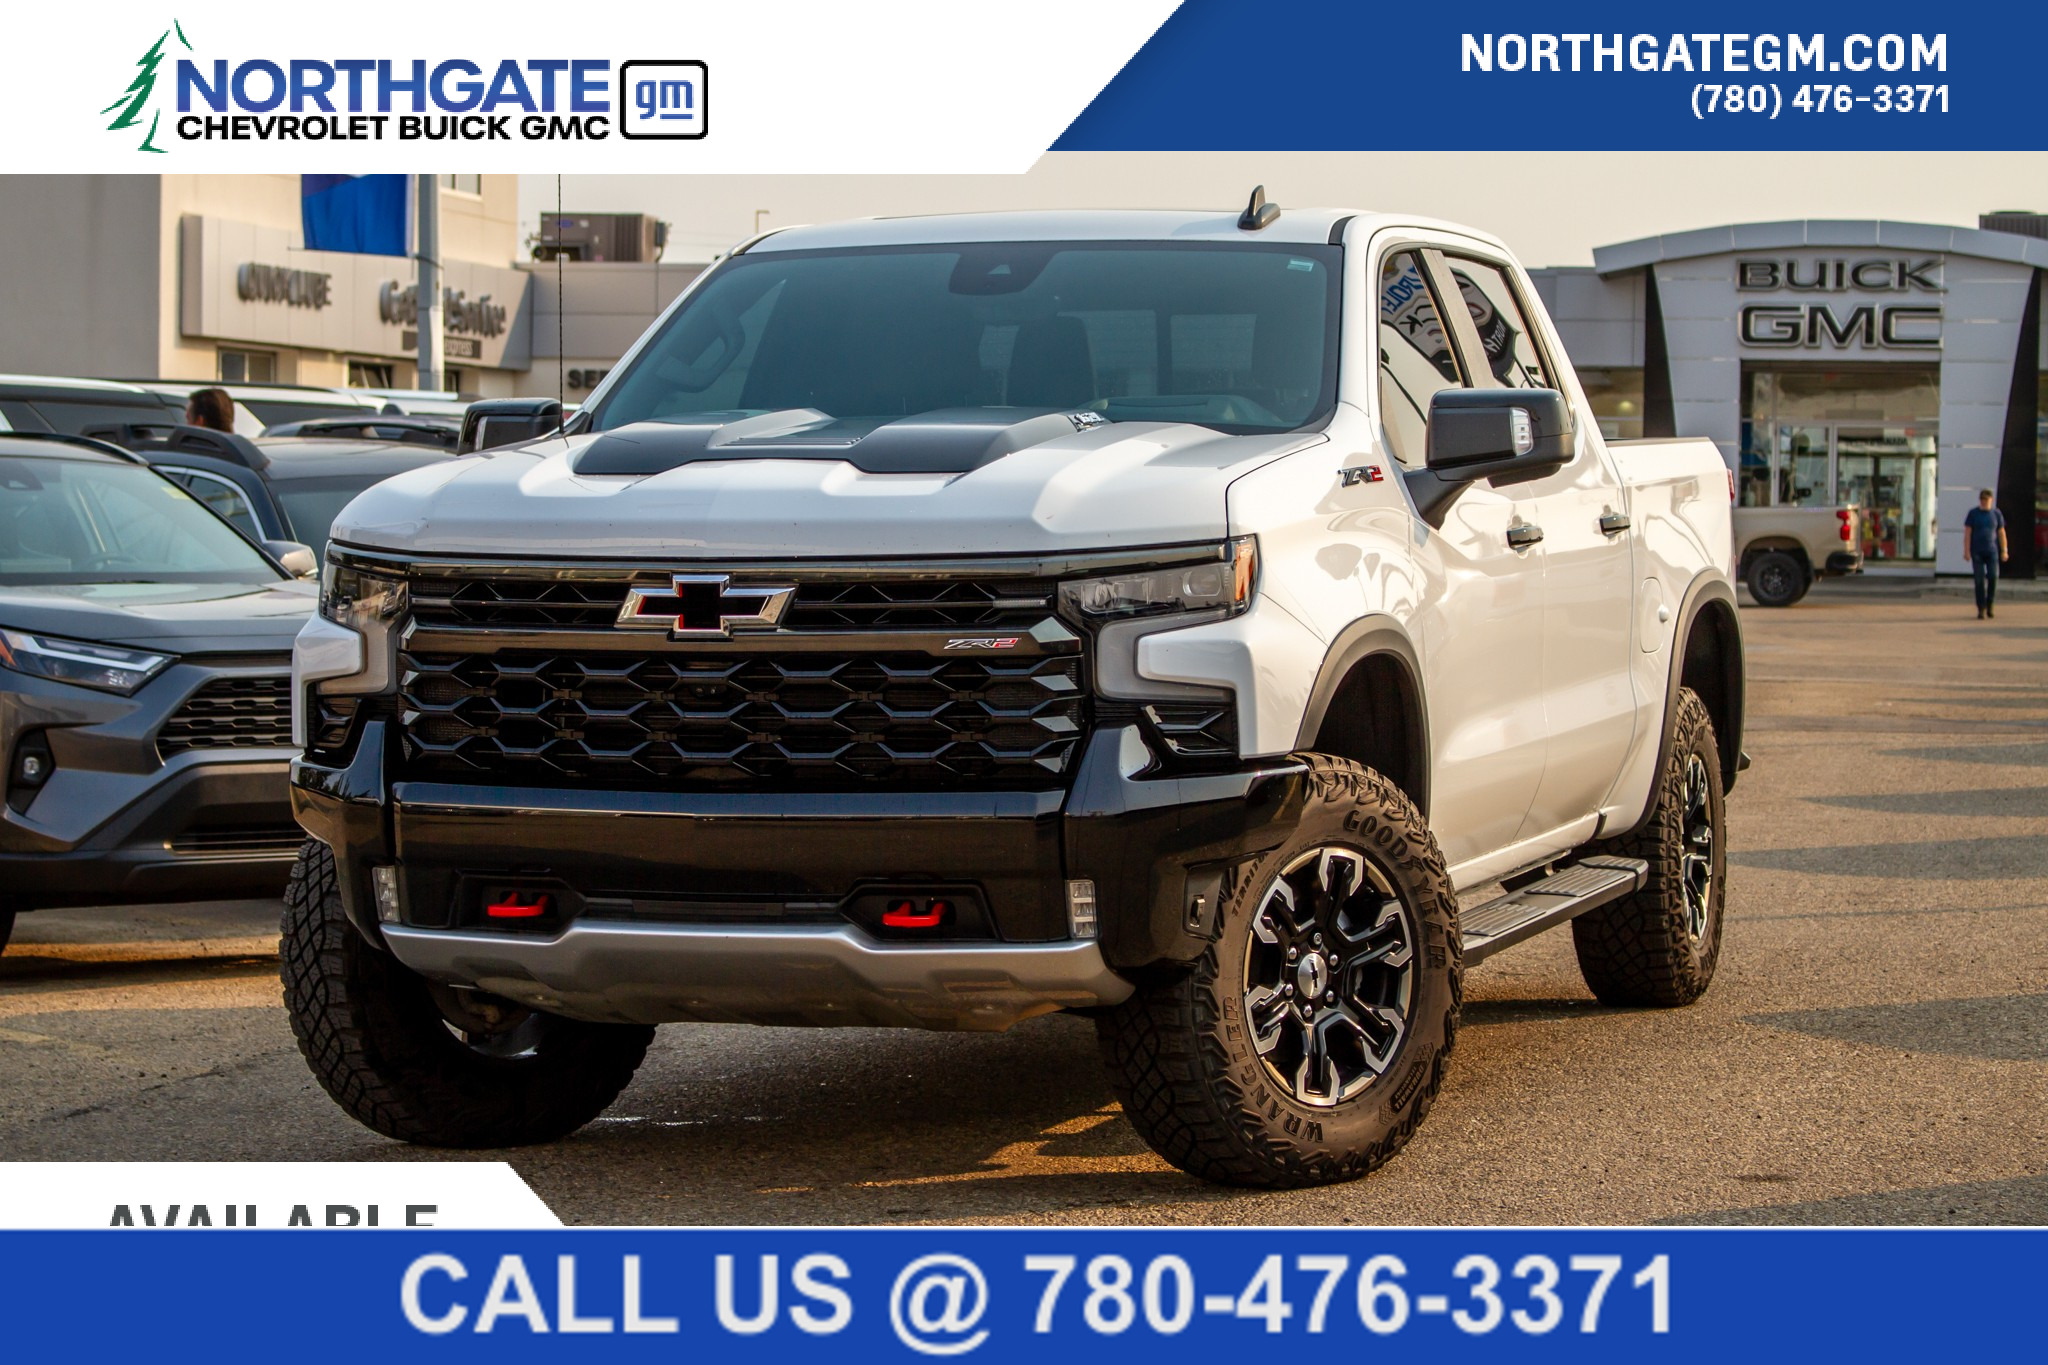 2022 Chevrolet Silverado 1500 ZR2 ZR2 | 6.2L | HEATED/COOLED LEATHER | SUNROOF |